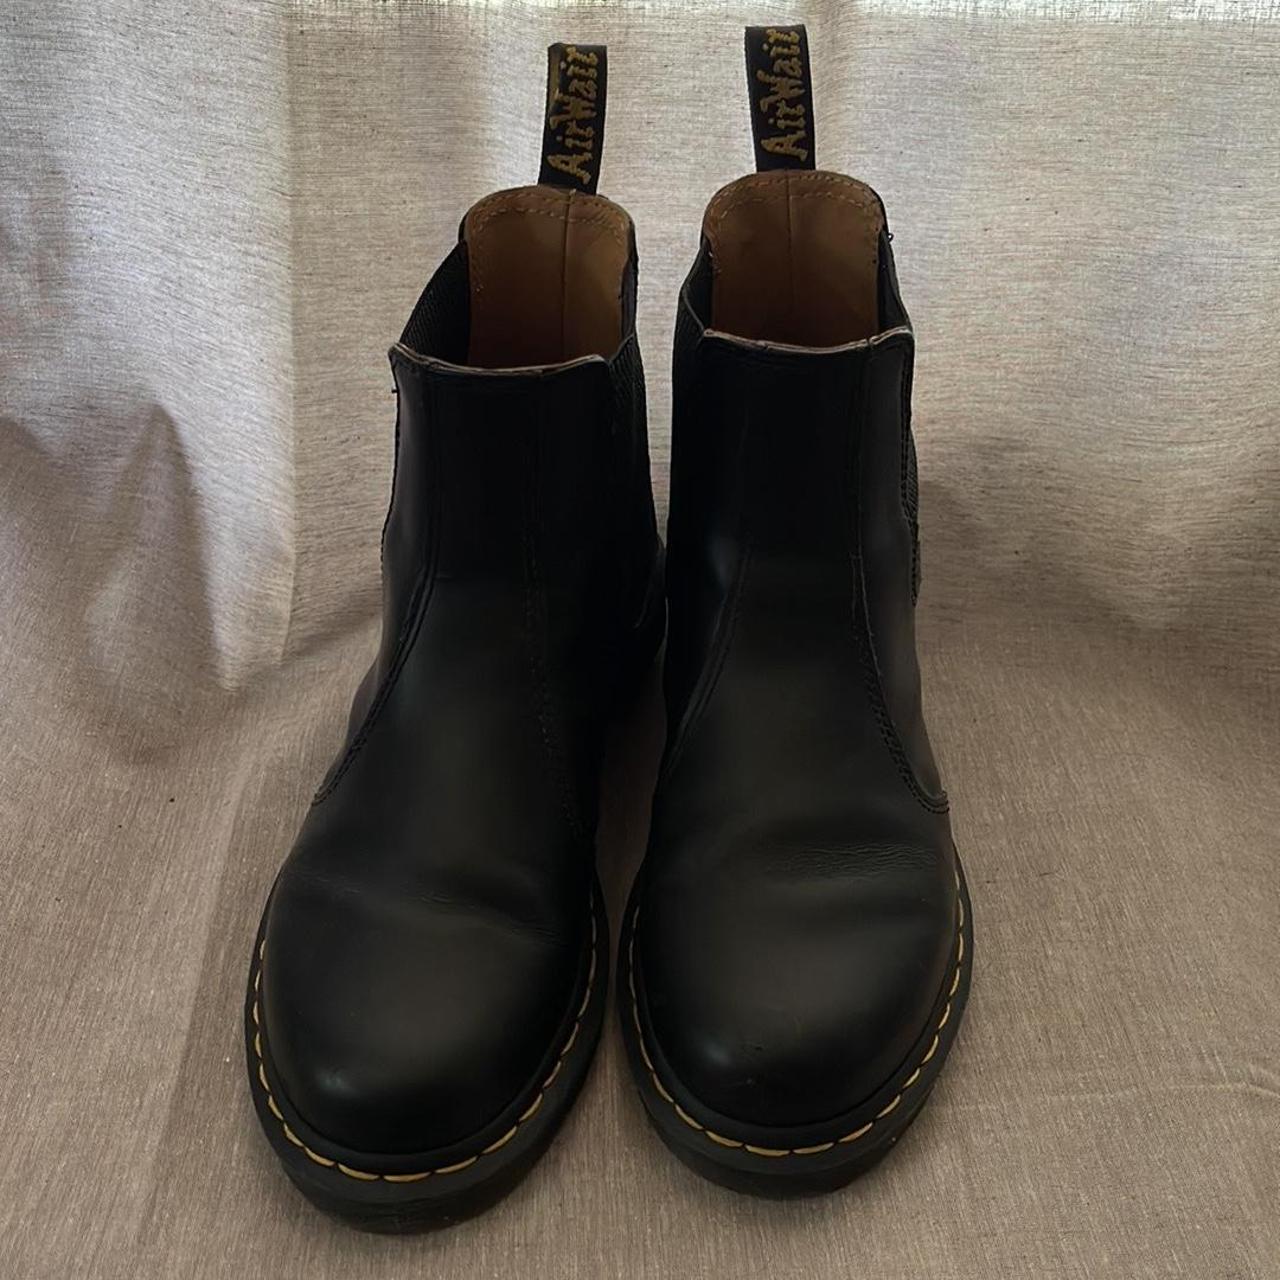 Dr. Martens Chelsea Boot. Some scuffing on toes. Not... - Depop